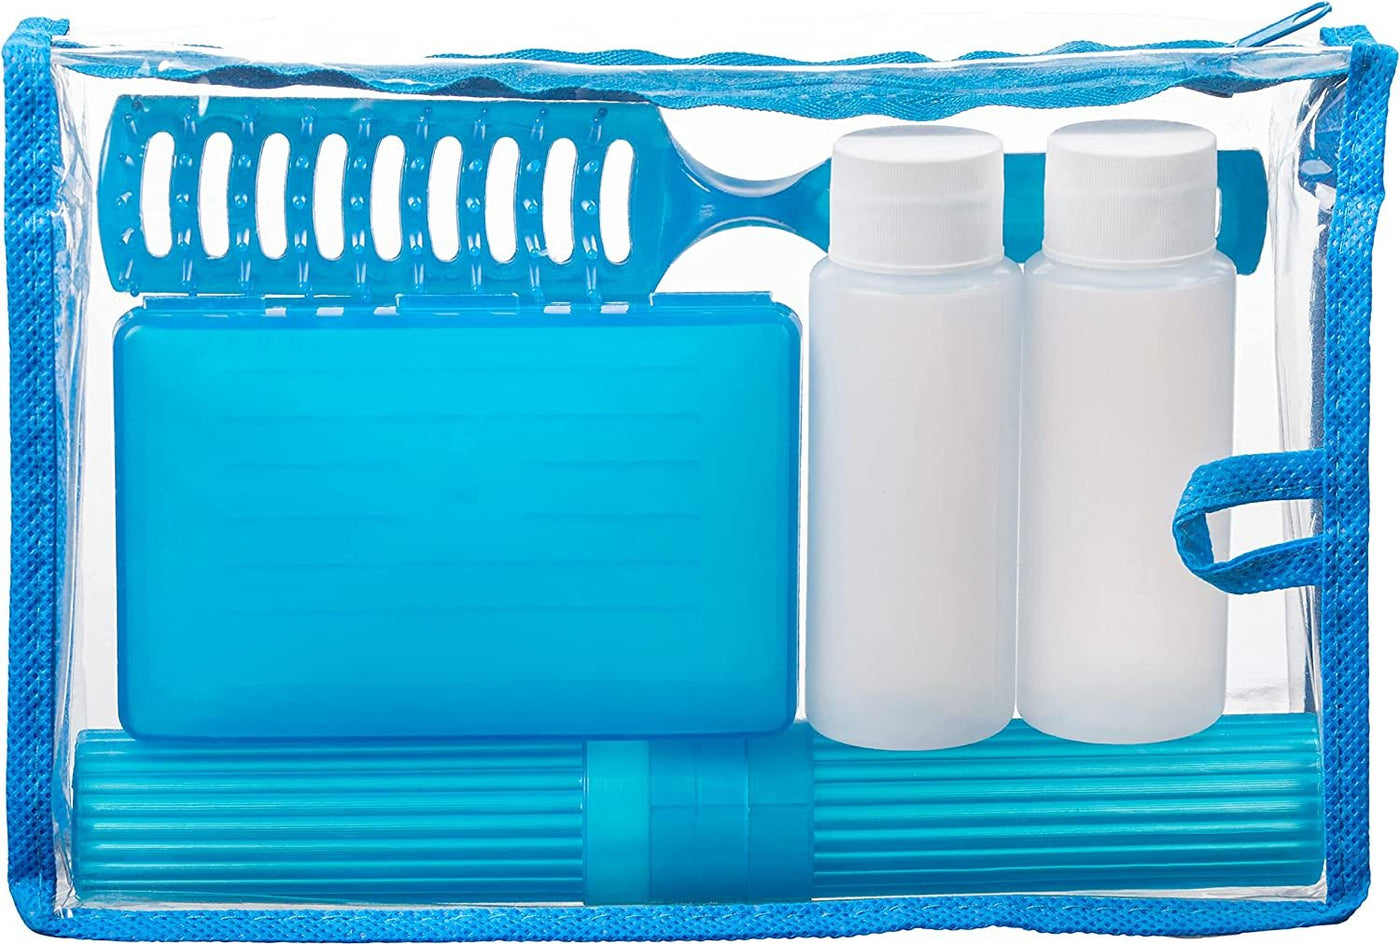 Toiletry kit with deodorant, travel toilet paper, soap, toothbrush